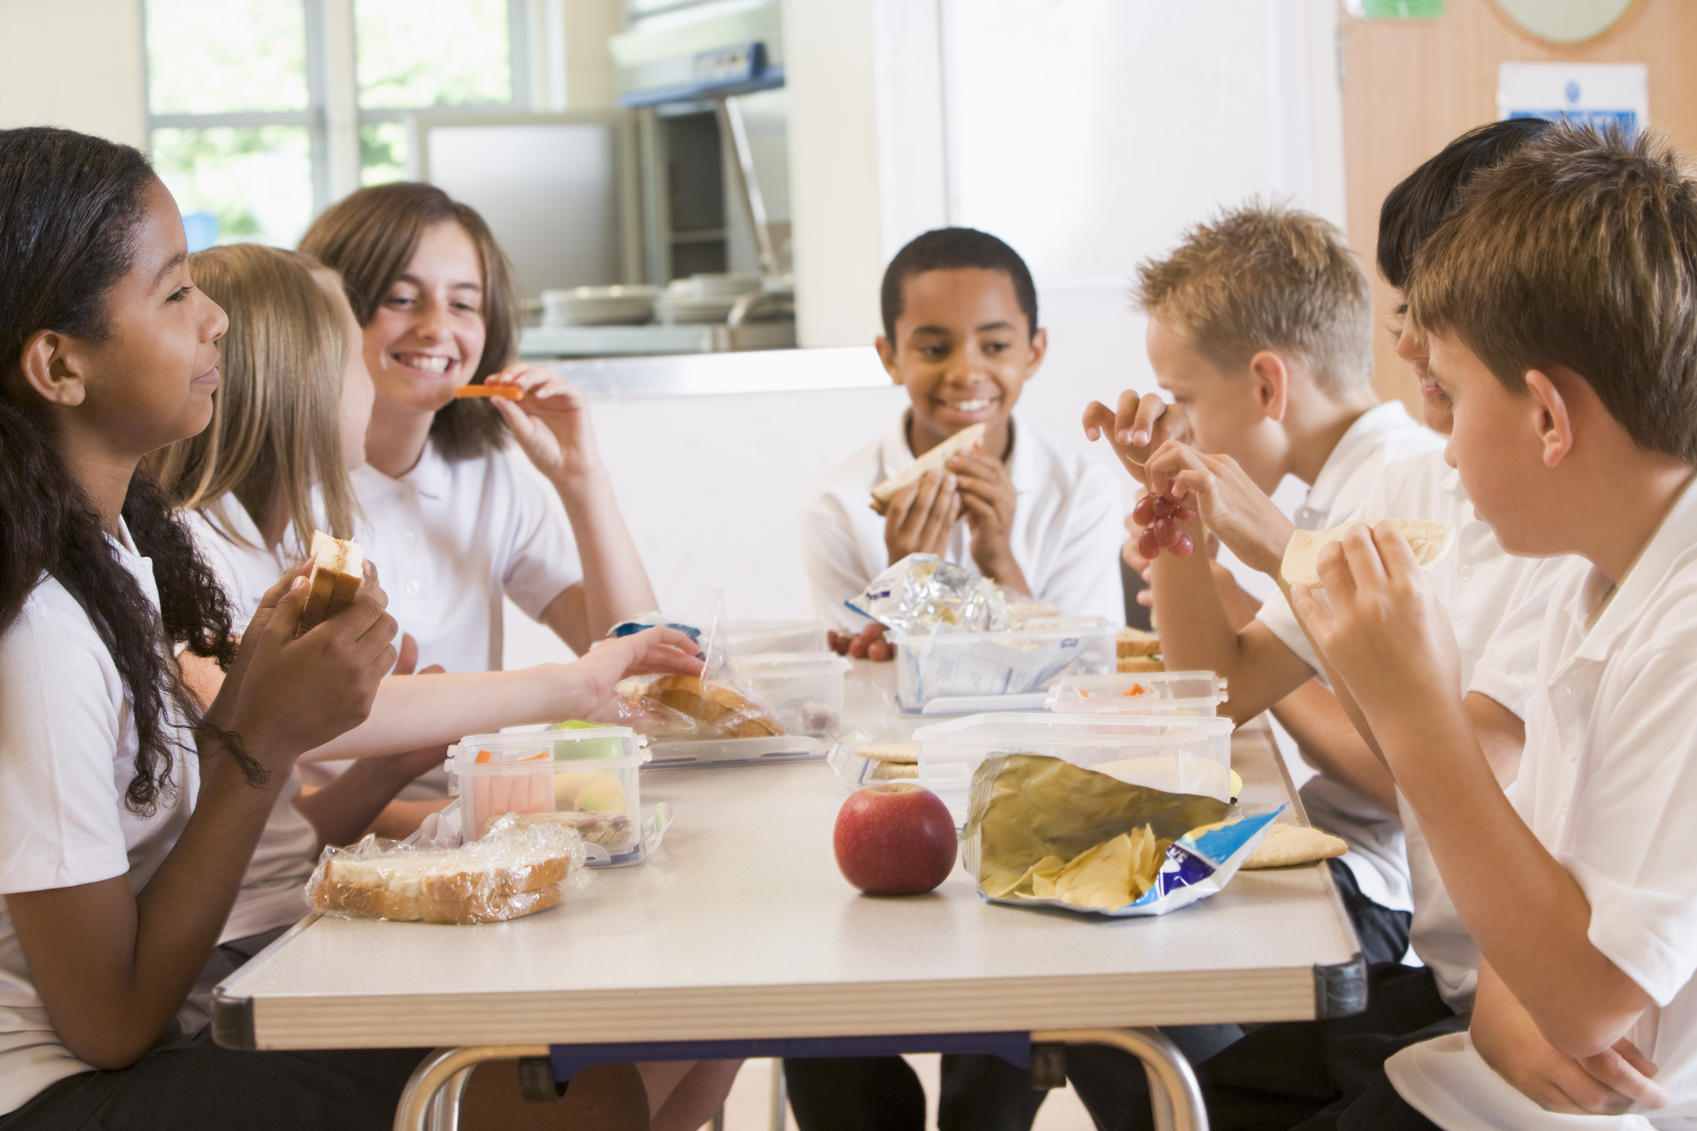 5 Mistakes Parents Make Packing Lunch for Kids